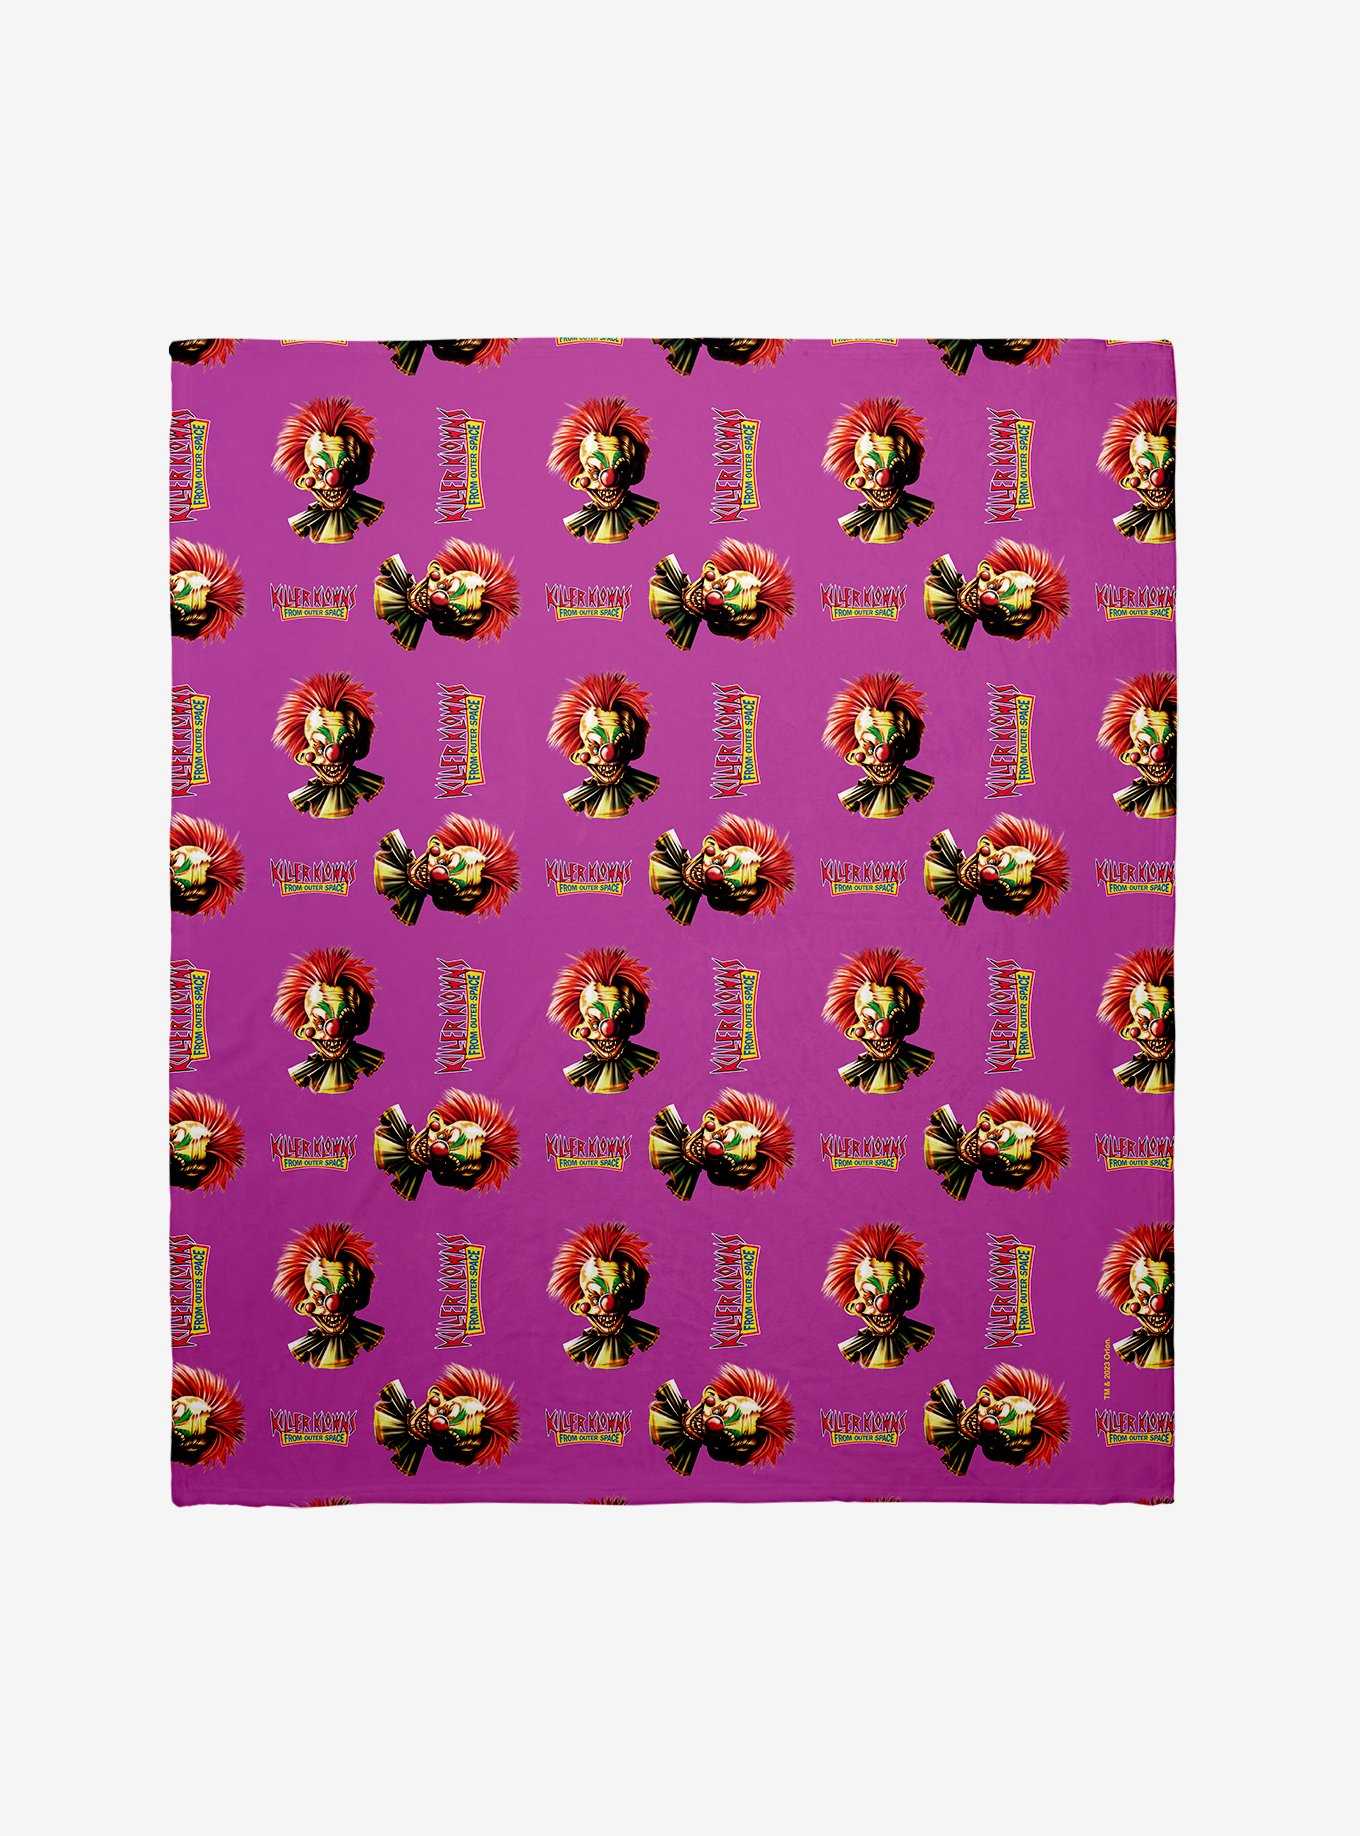 Killer Klowns From Outer Space Rudy Throw Blanket, , hi-res